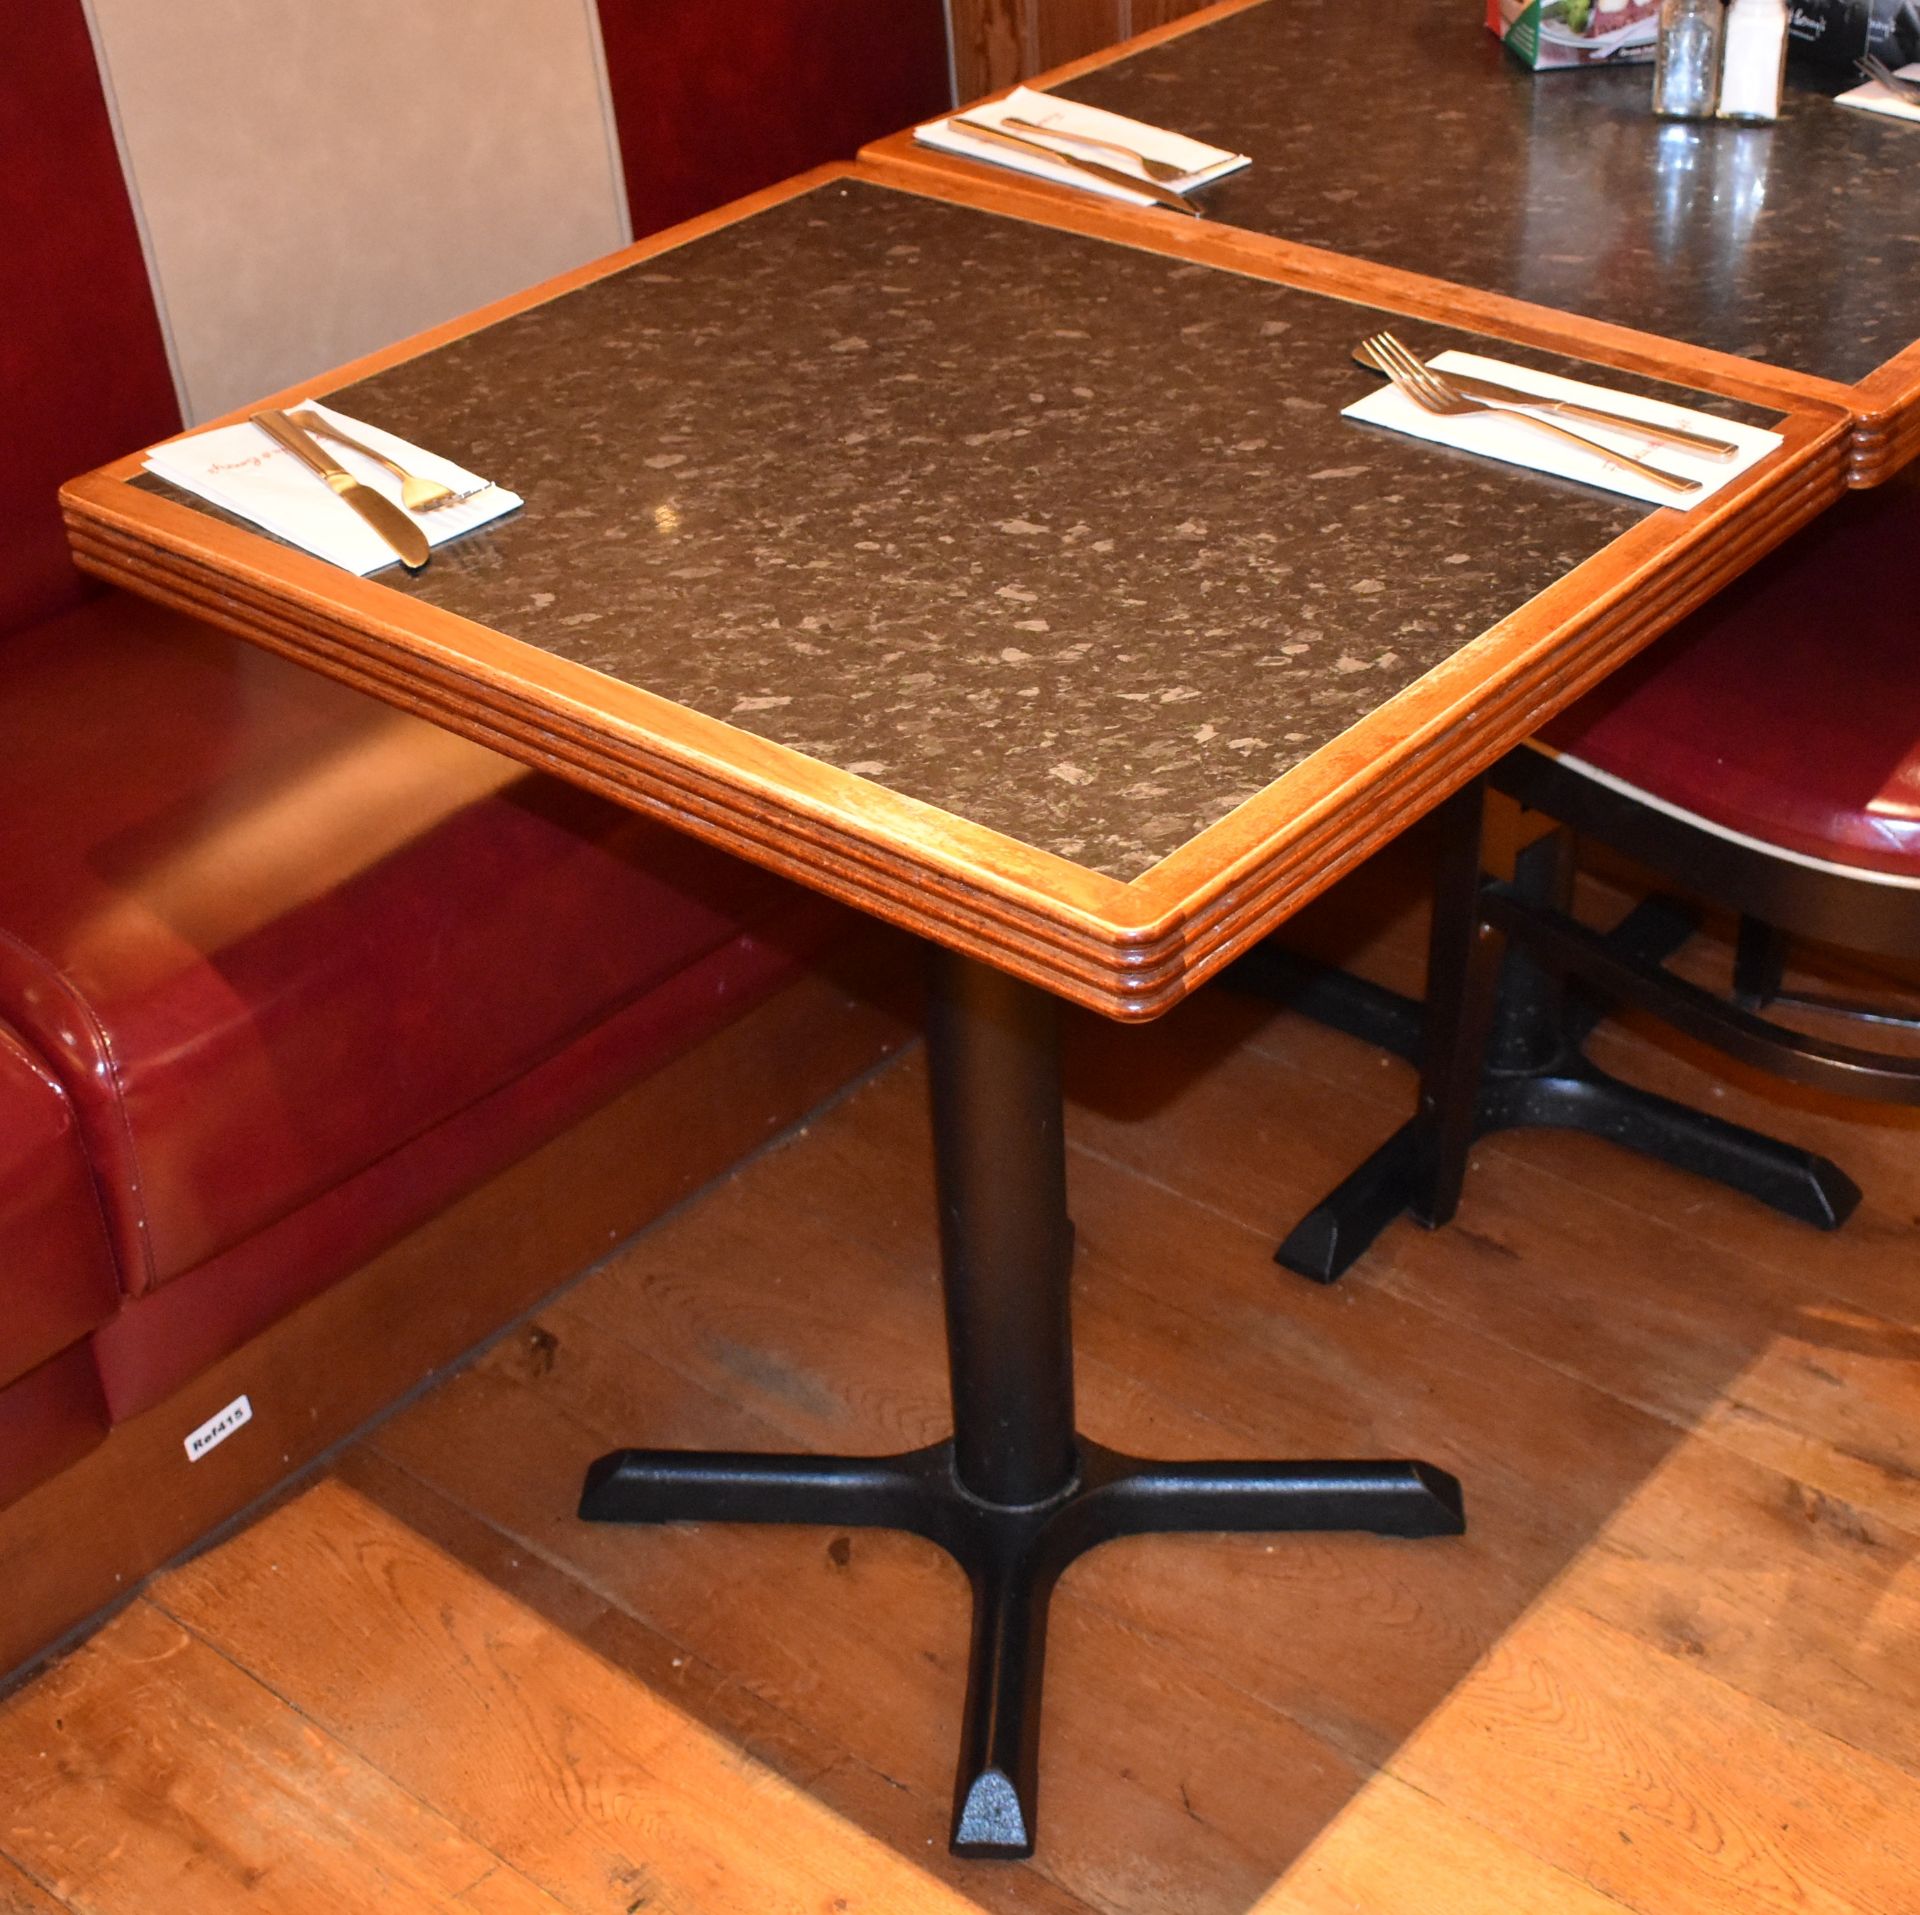 10 x Restaurant Bistro Tables With Granite Effect Tops and Cast Iron Bases - From American Italian